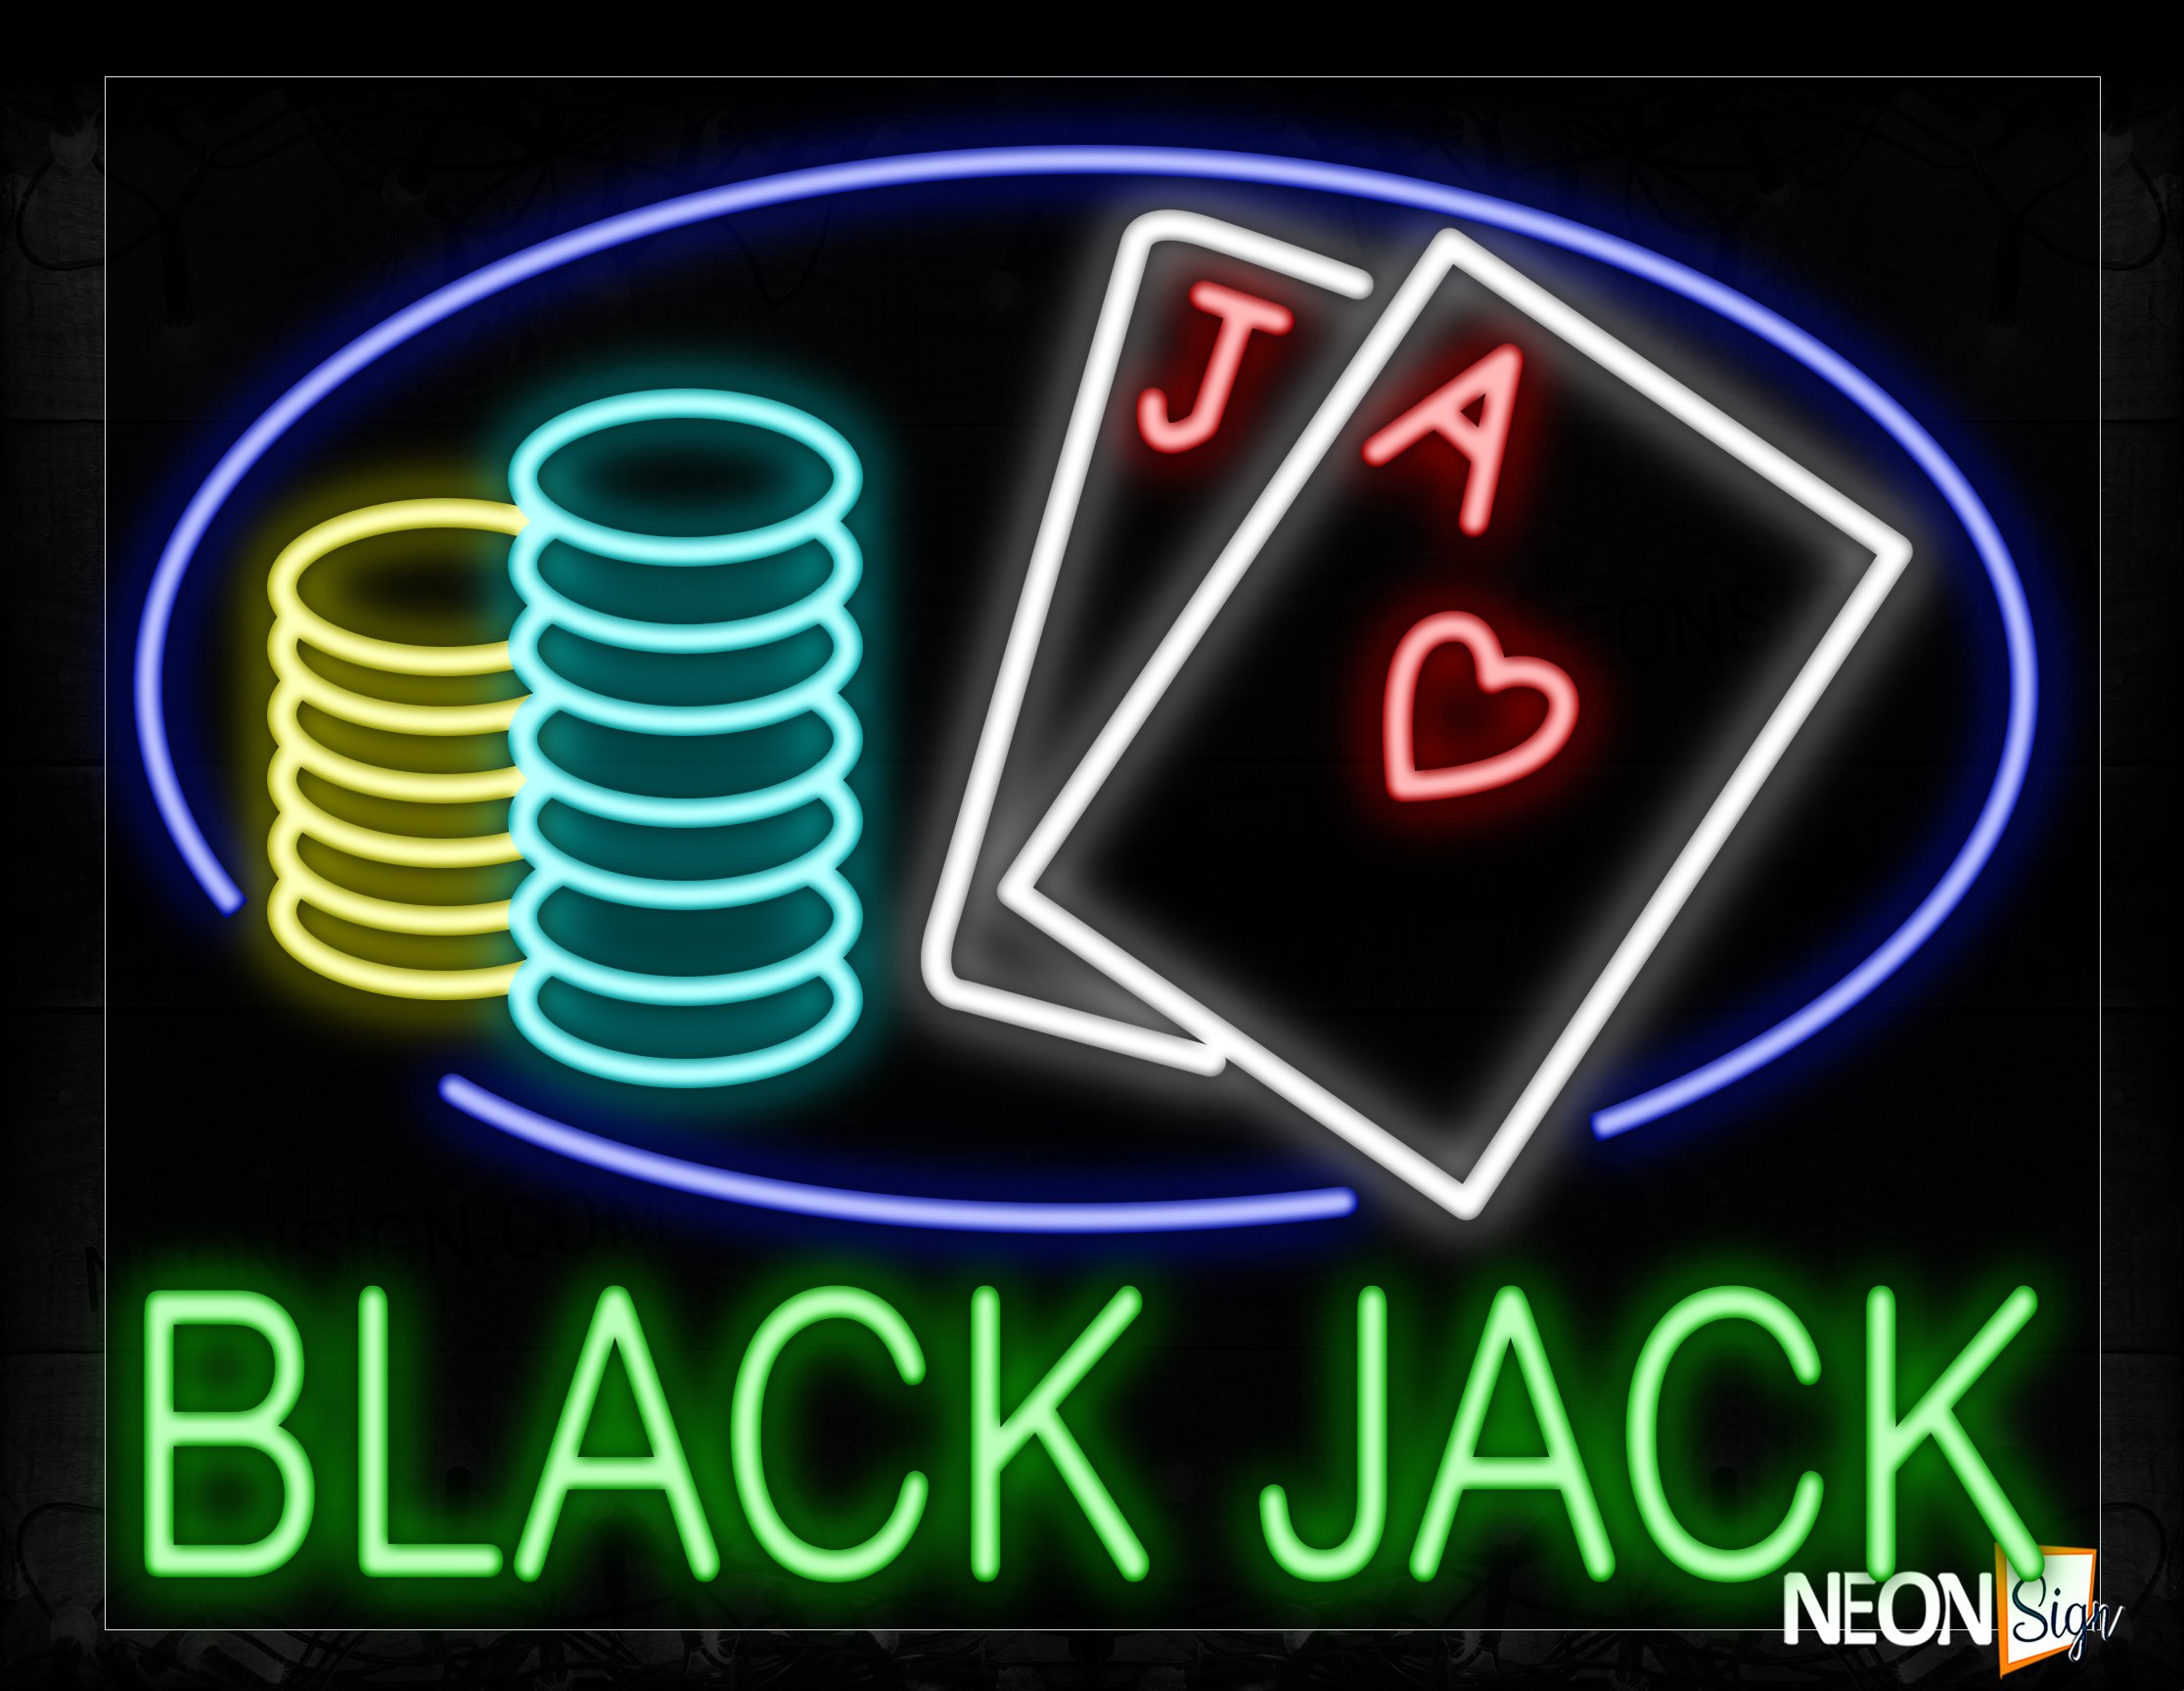 Image of 11665 Blackjack With Circle Border & Cards Neon Signs_24x31 Black Backing